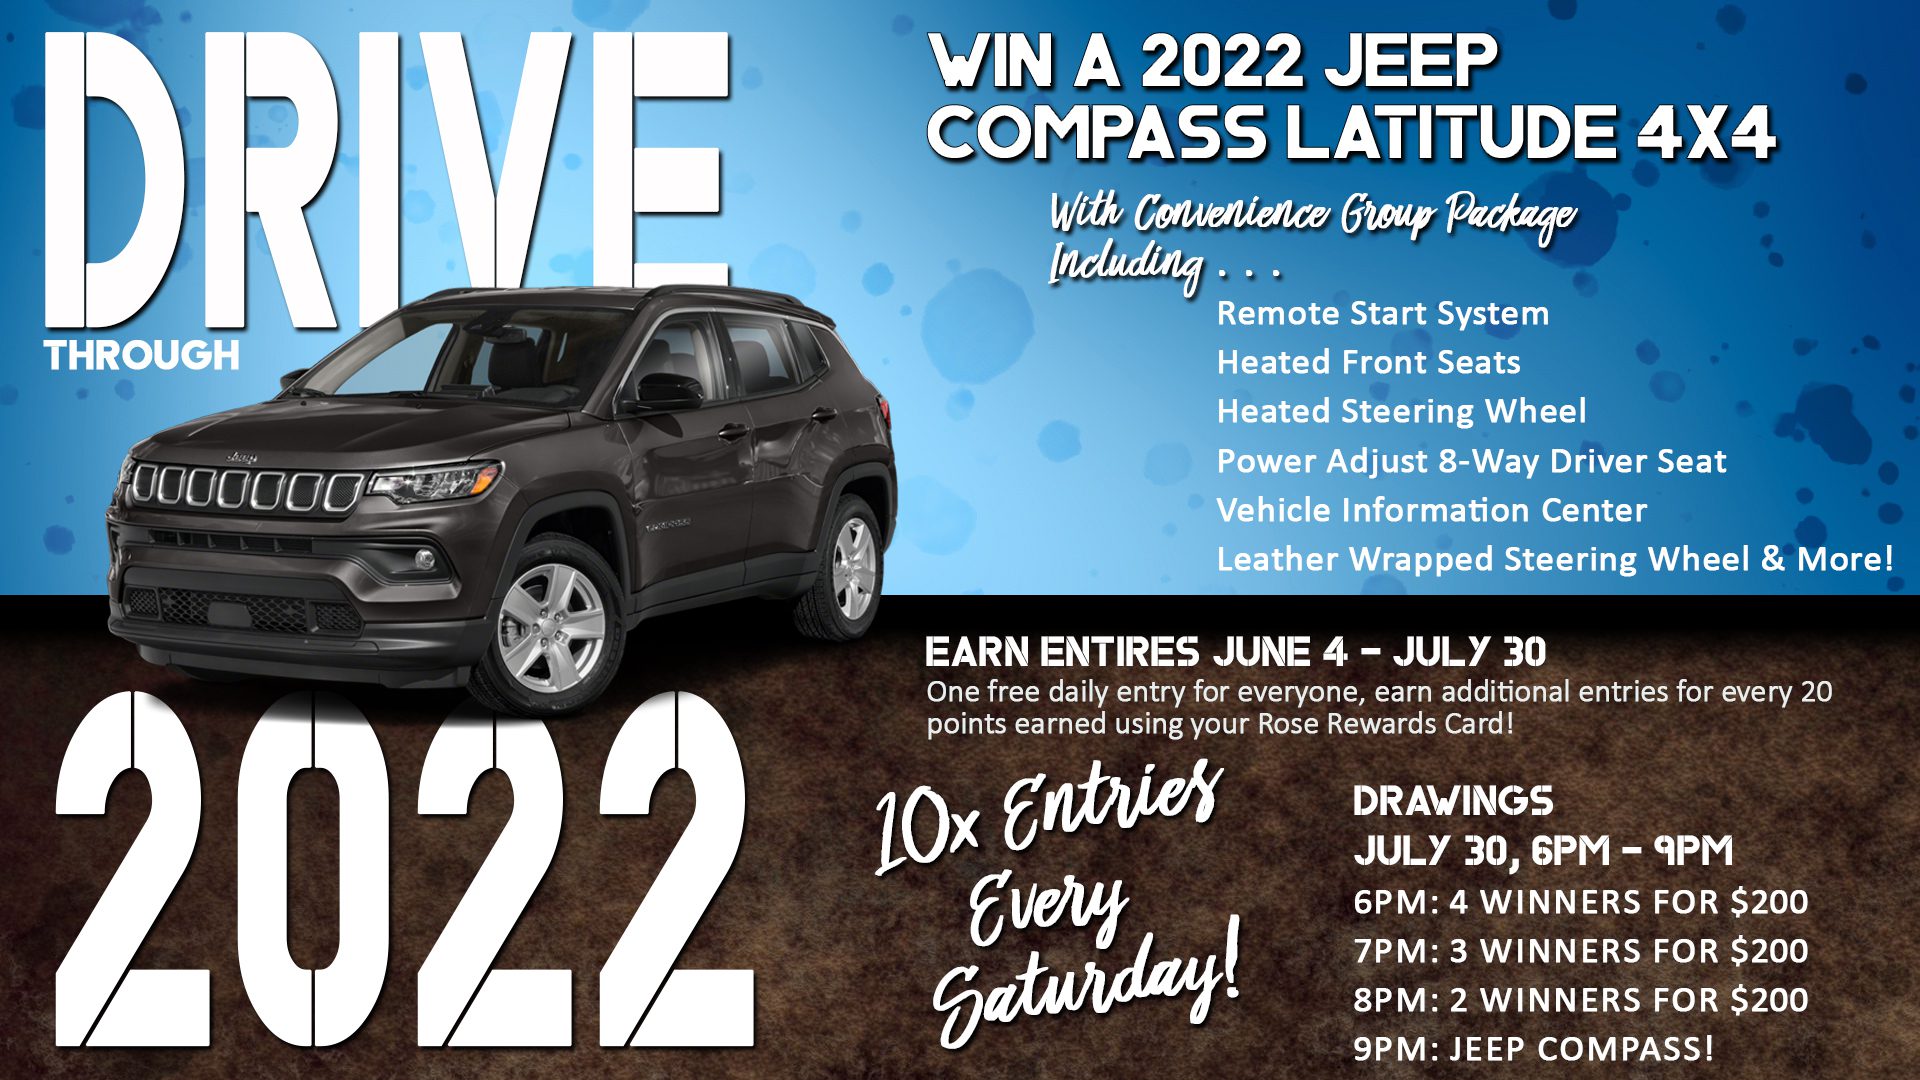 Promotional flyer for a 2022 drive-through event with a chance to win a 2022 jeep compass latitude 4x4, featuring multiple prize drawings and entry details.